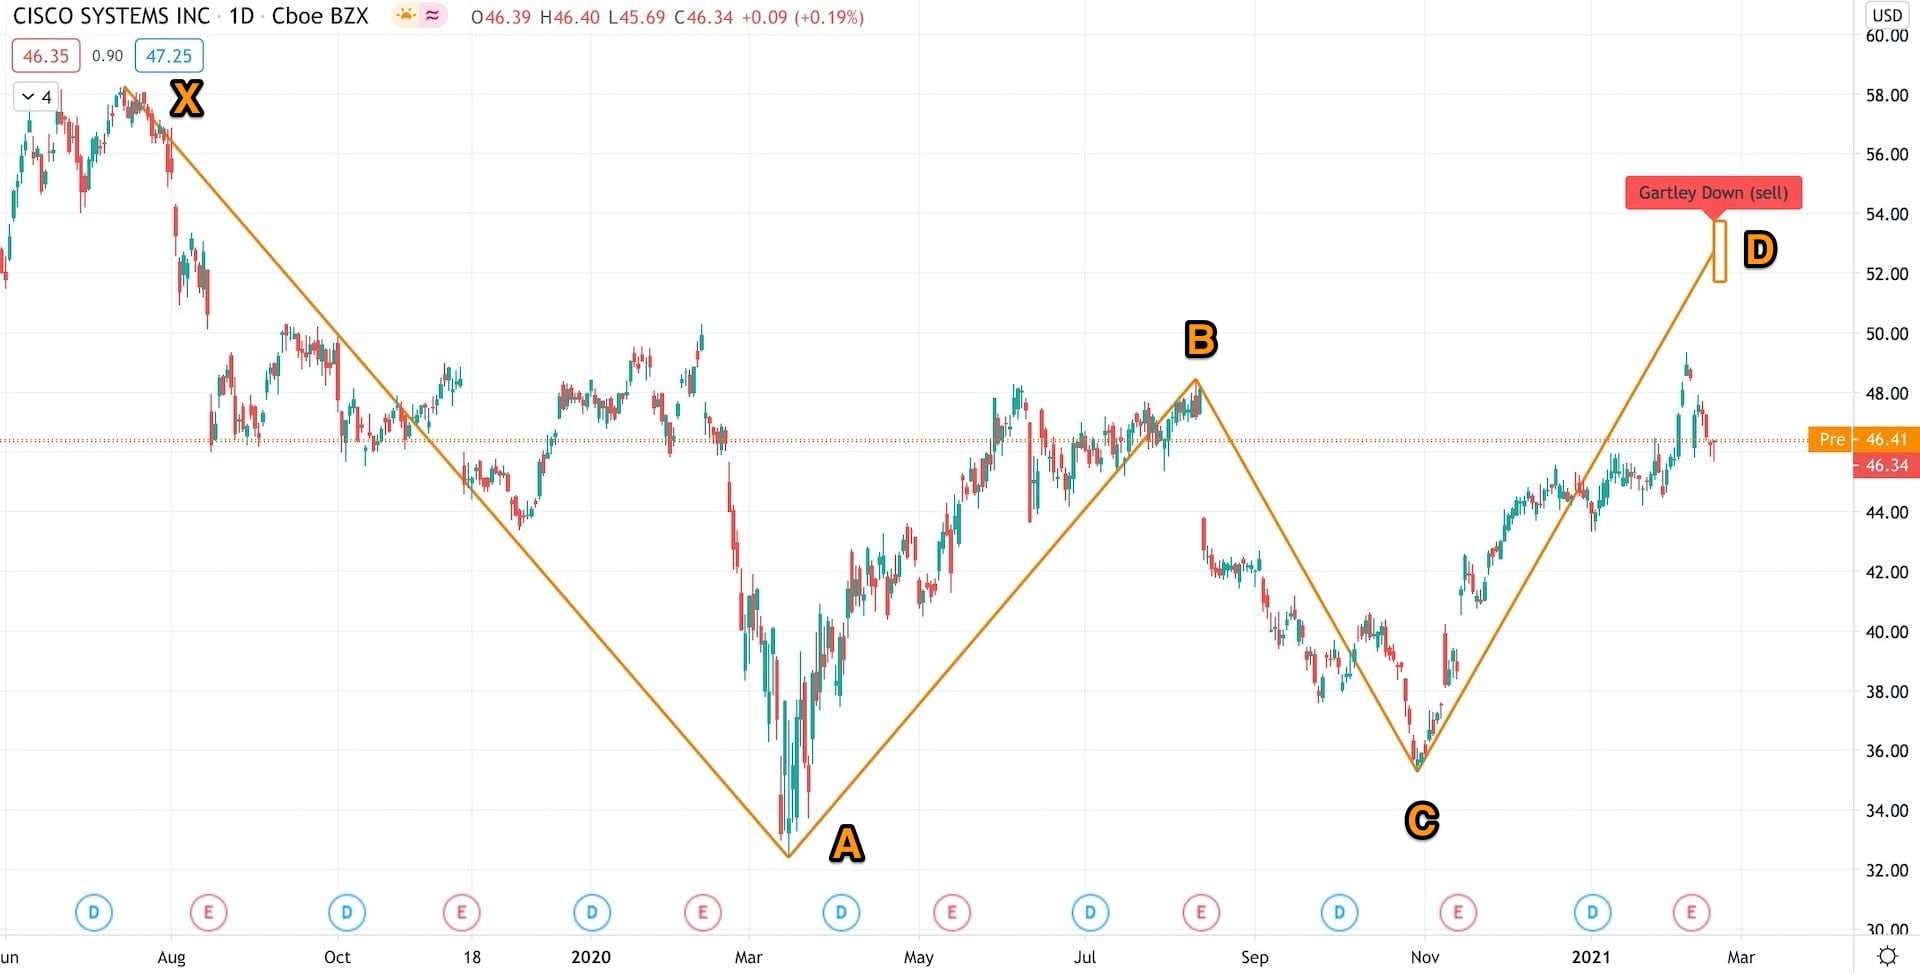 Possible Gartley formation for CISCO. You can click on any of the charts to zoom in.